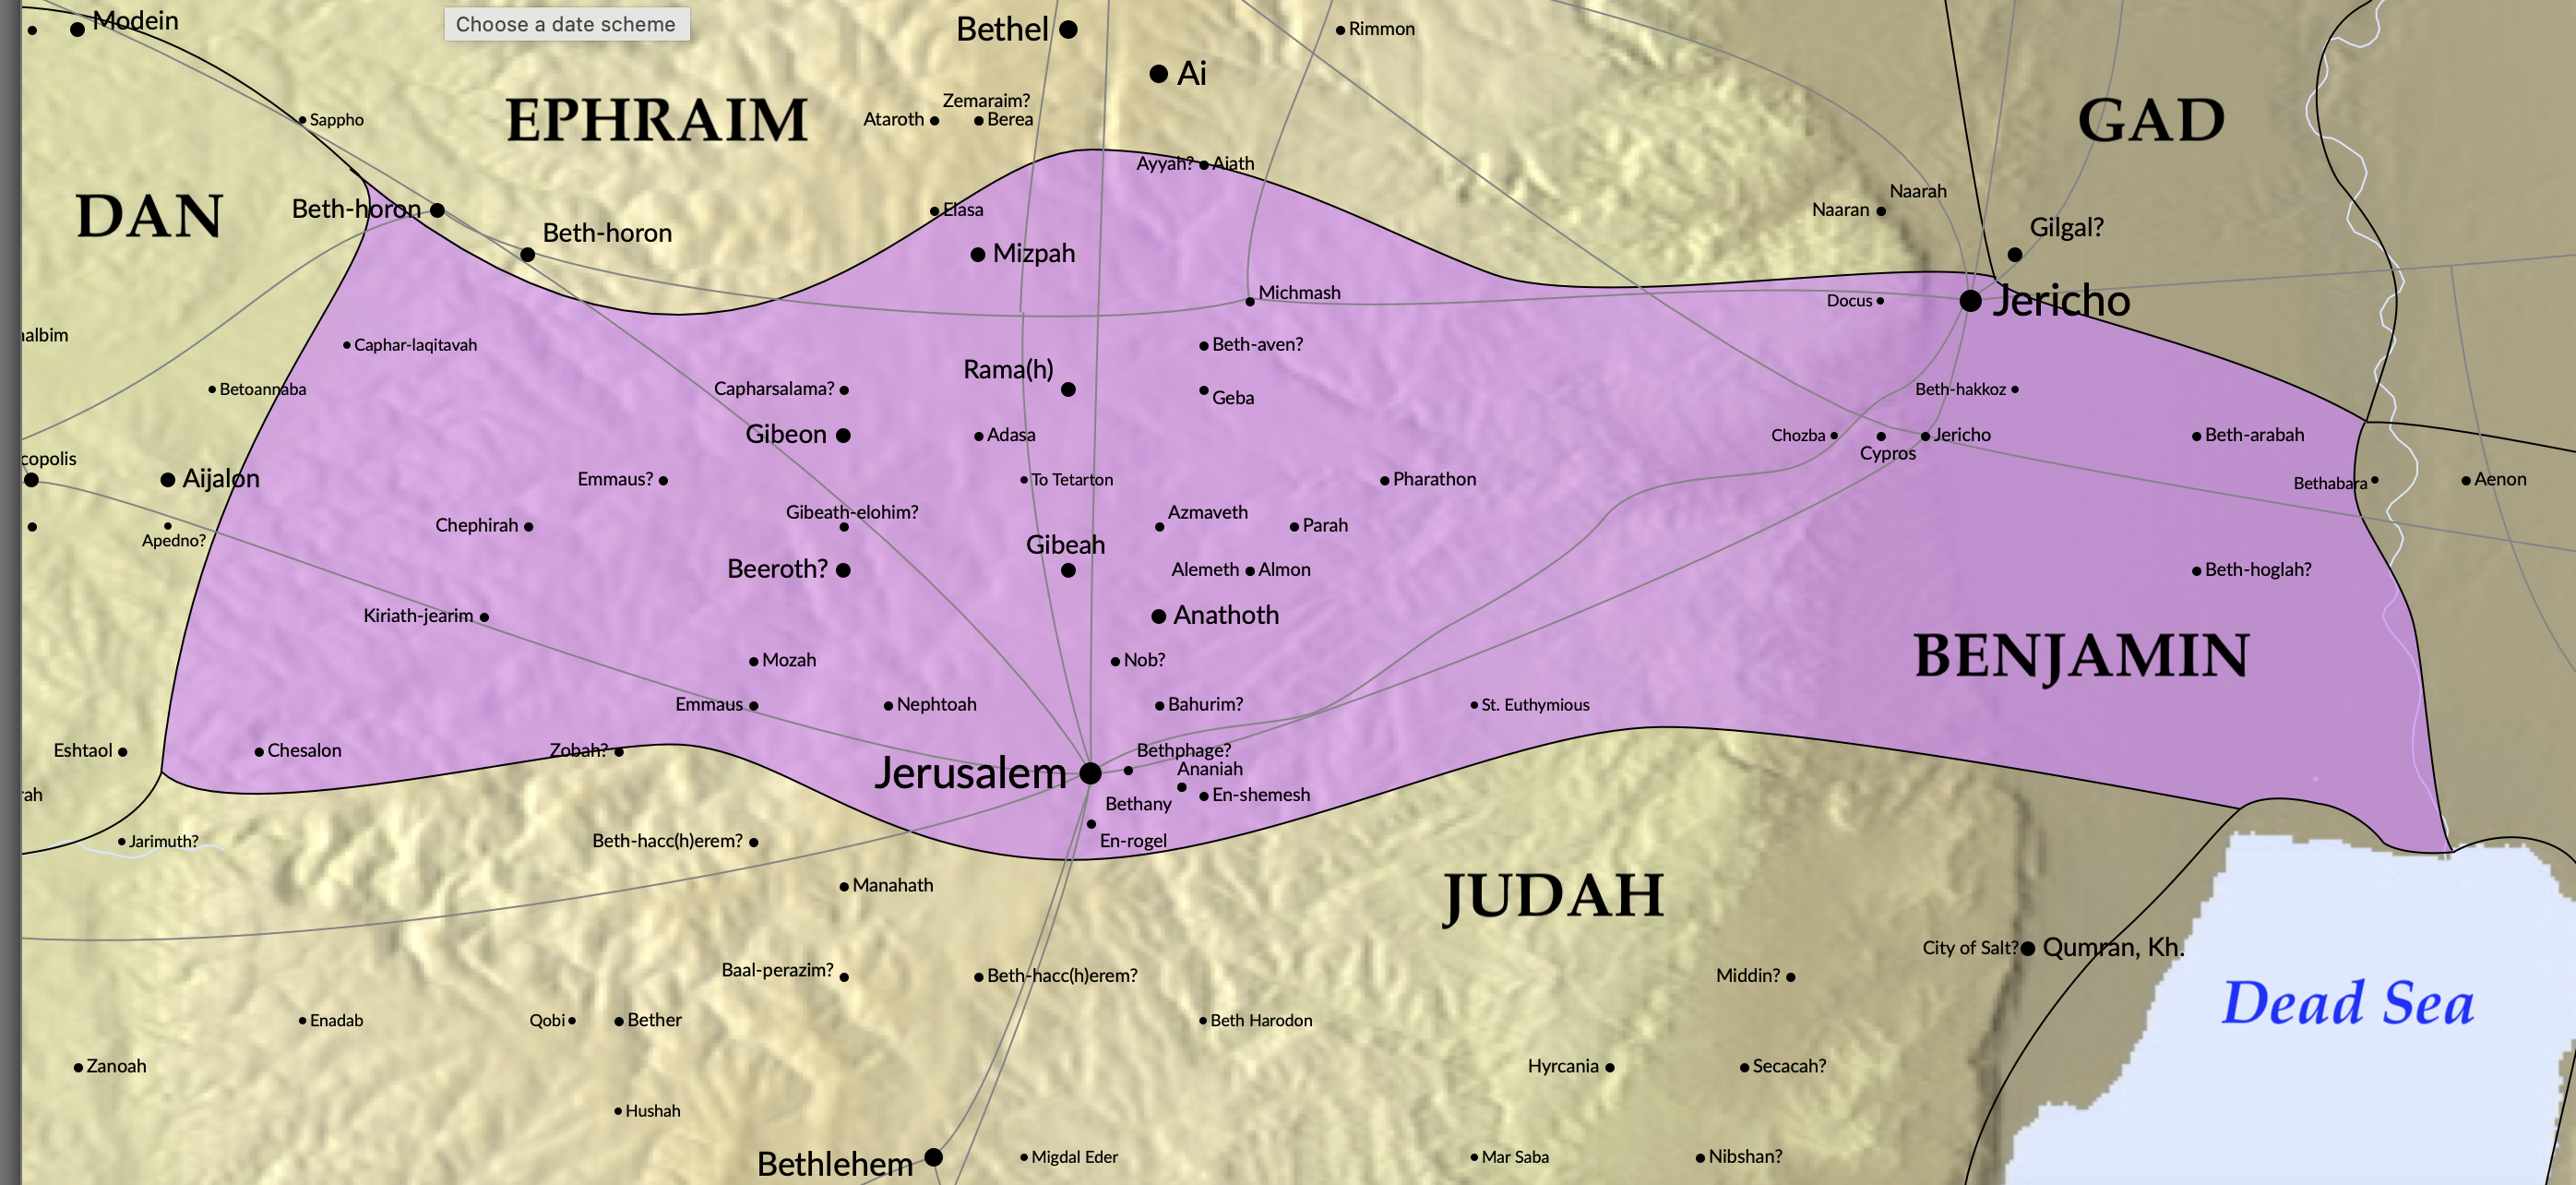 A map of the cities within the tribe of Benjamin.